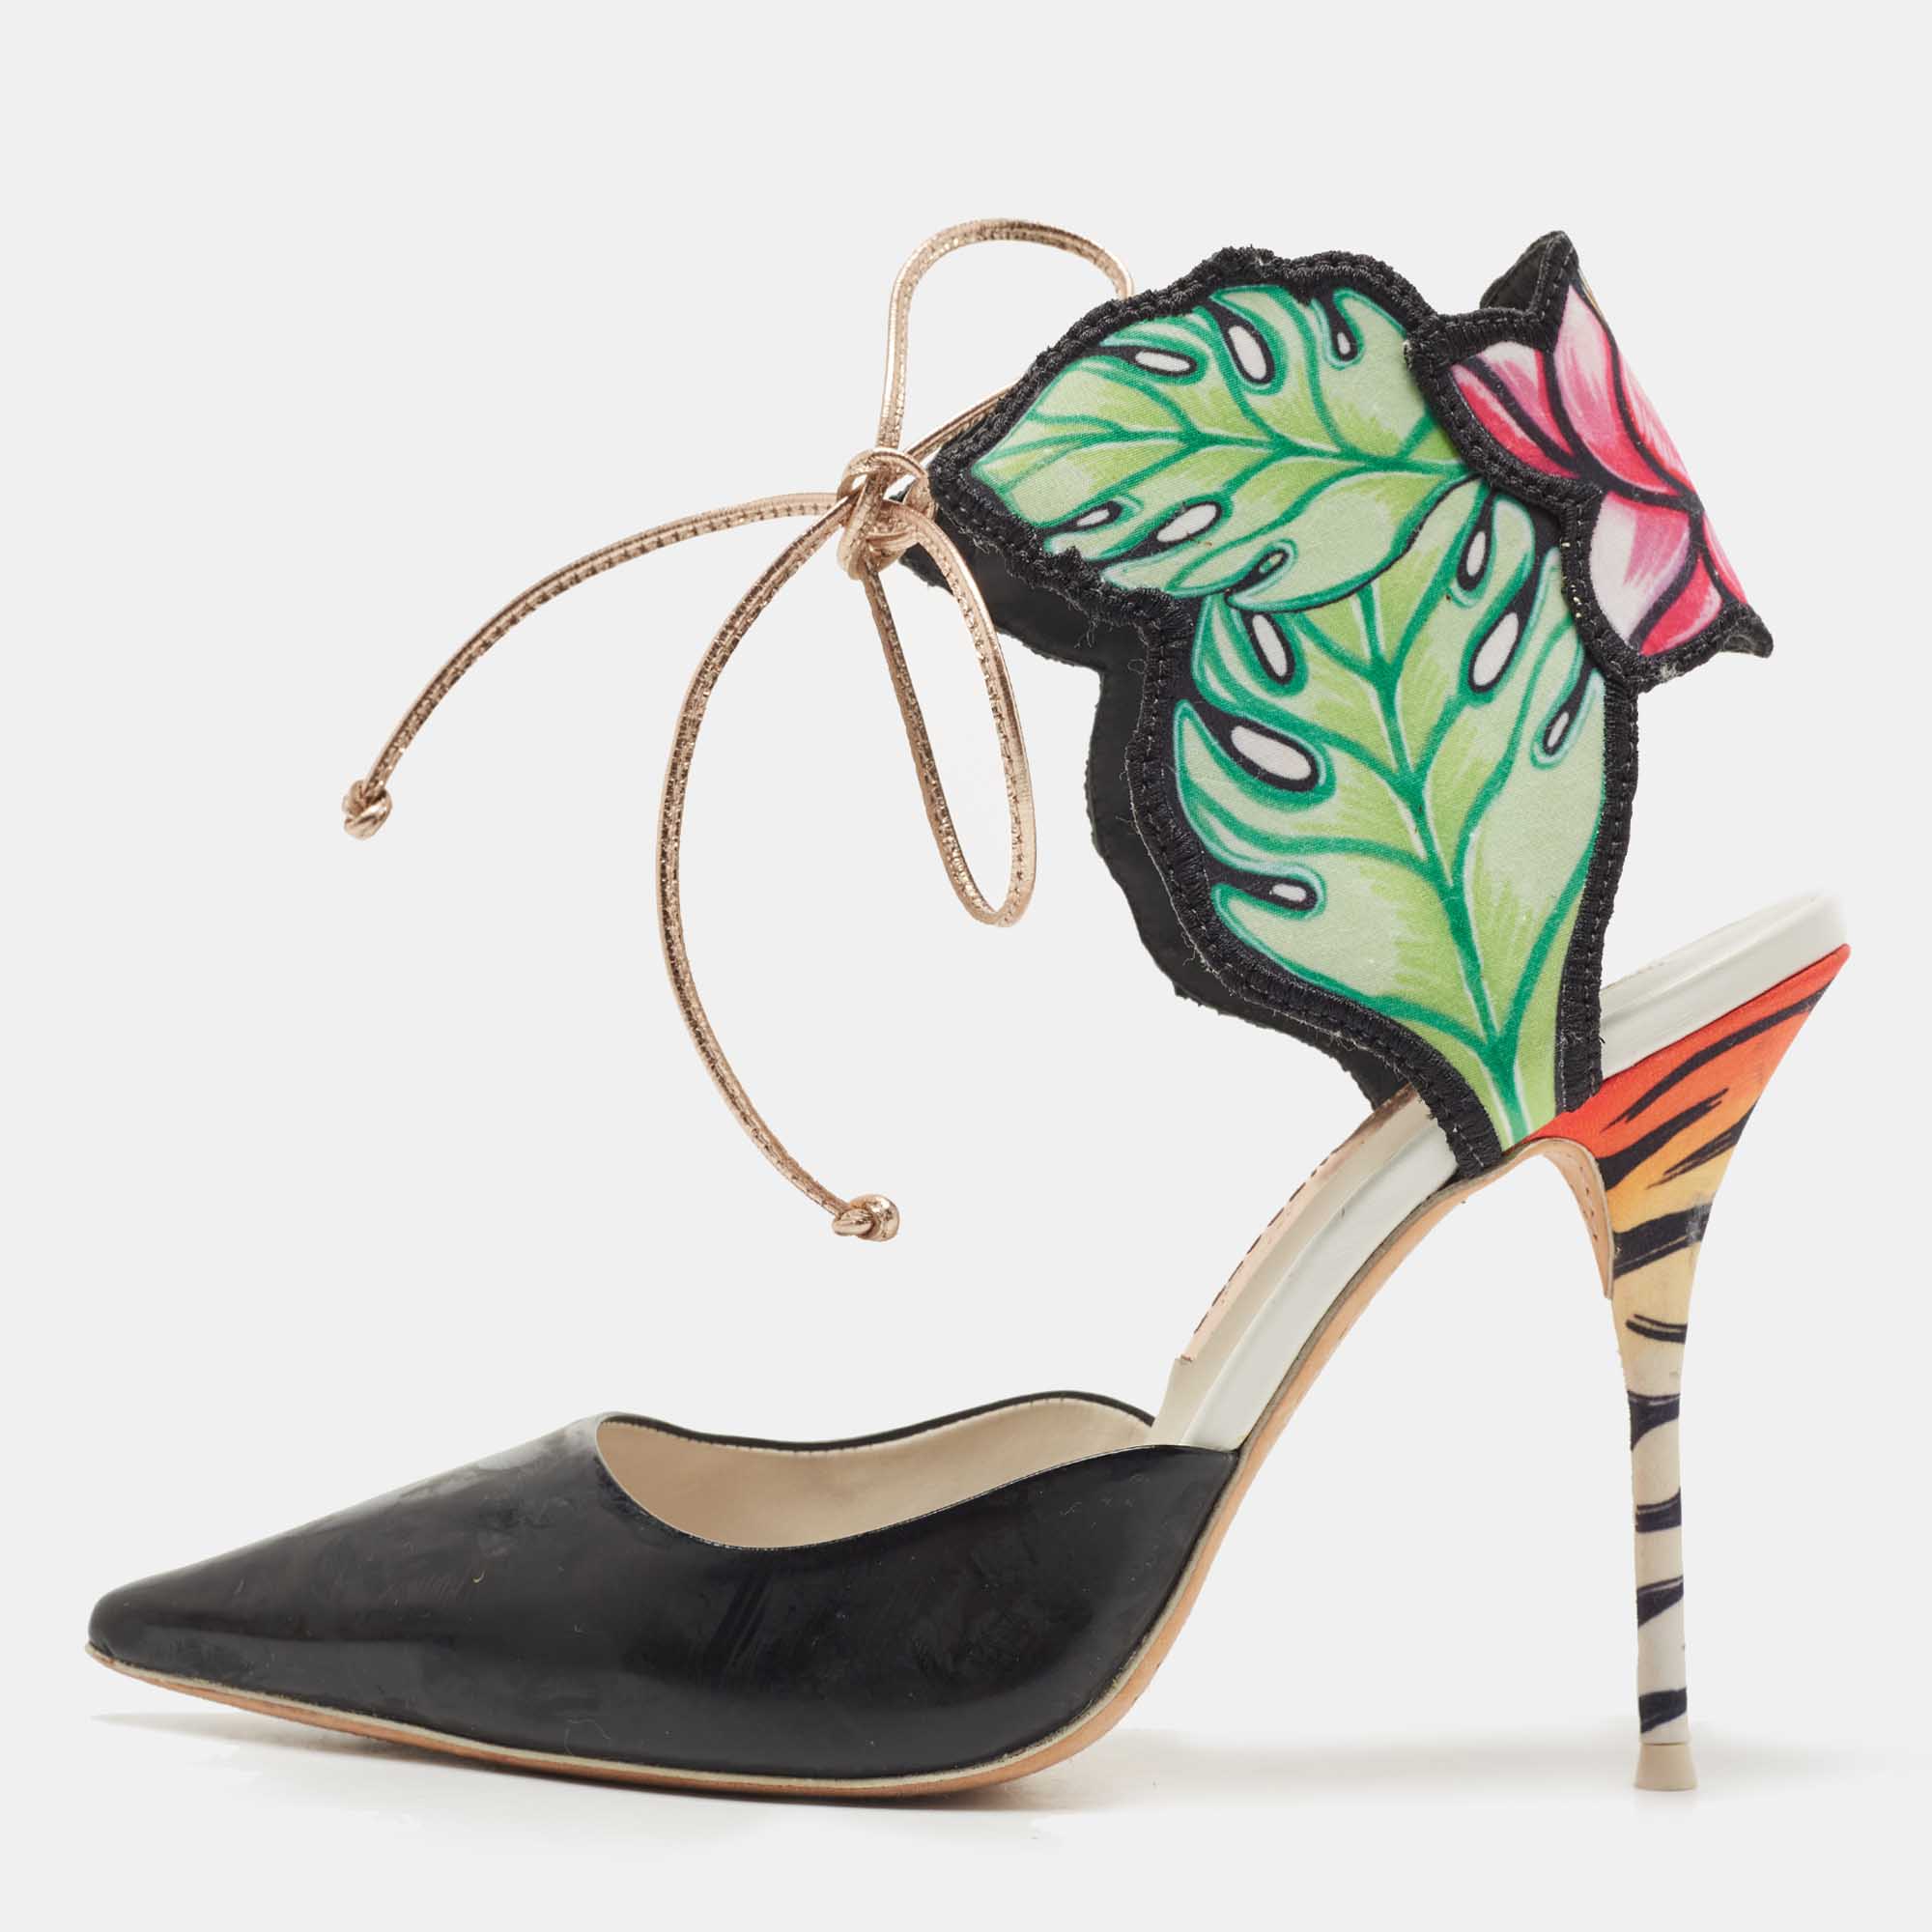 Sophia Webster Tricolor Leather And Satin Rousseau Jungle Ankle Tie Pumps Size 39